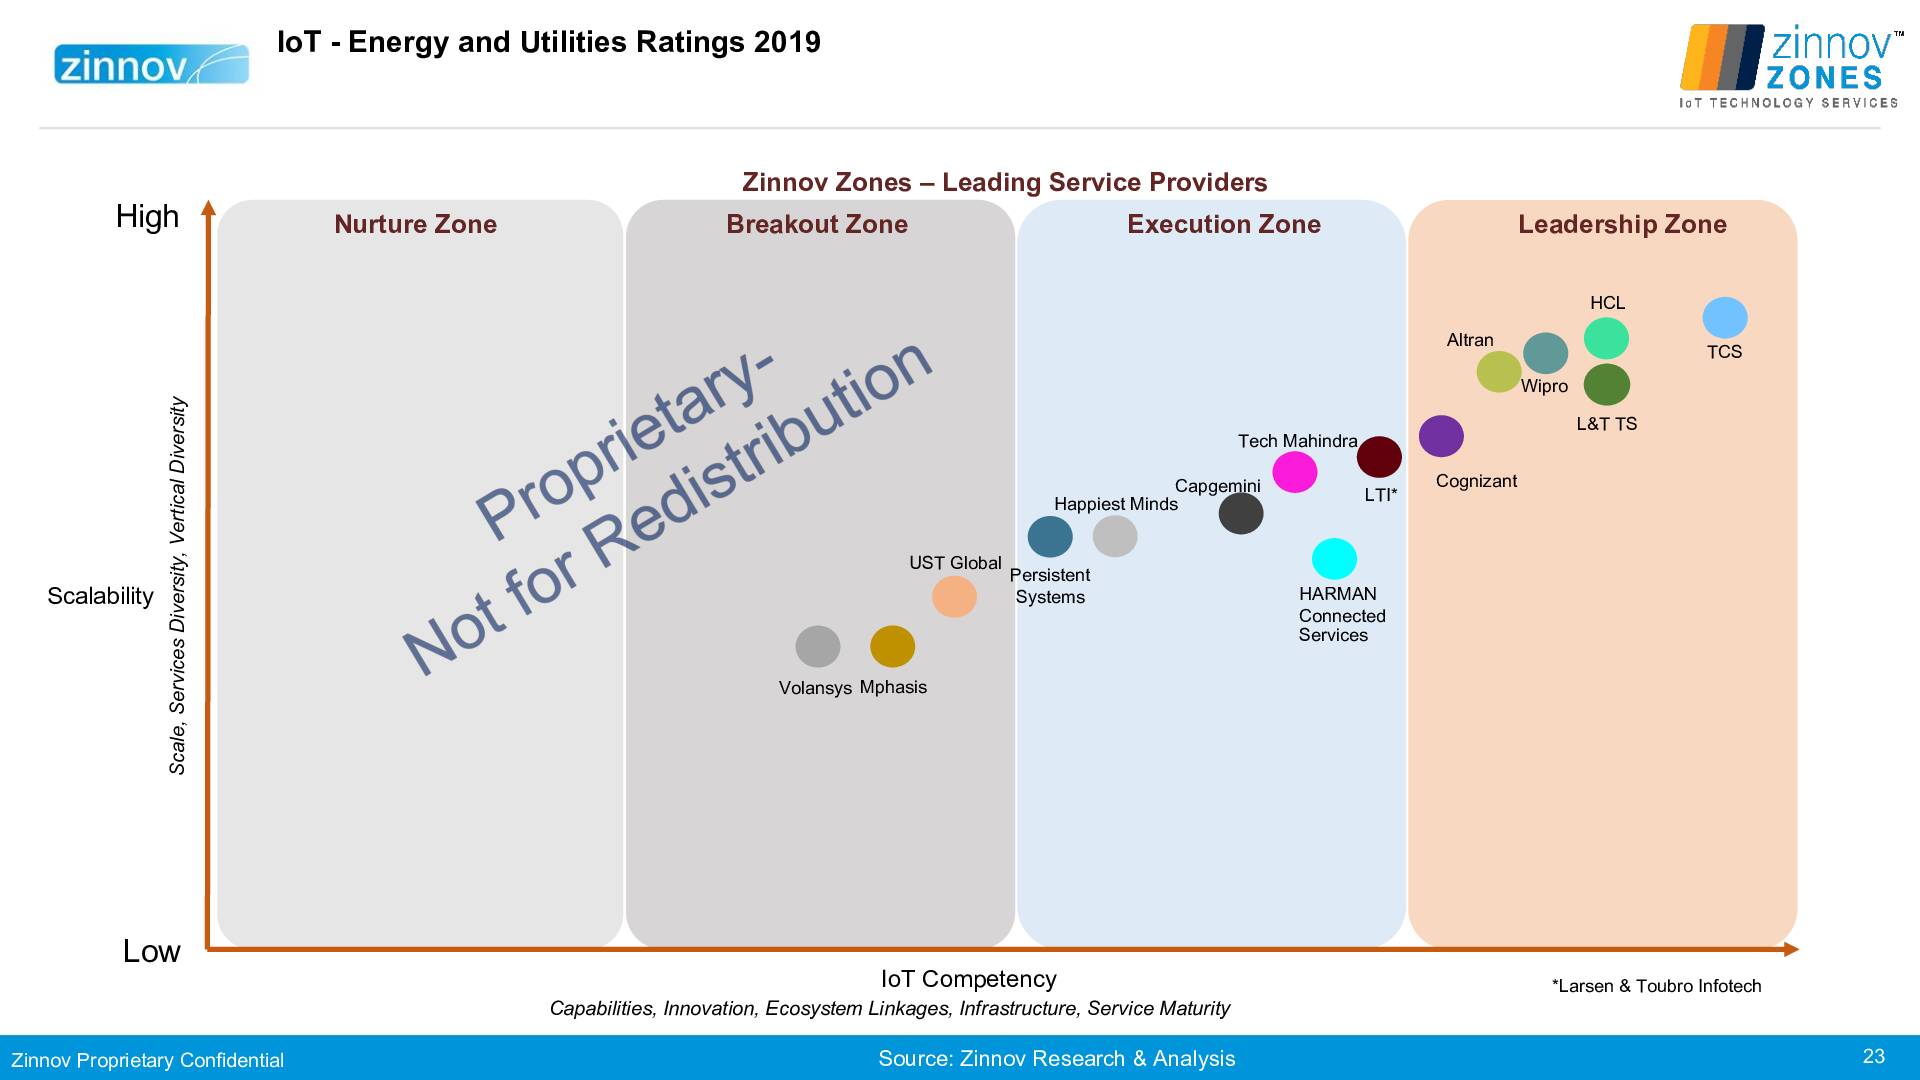 Zinnov Zones Iot Technology Services 2019 Ratings23